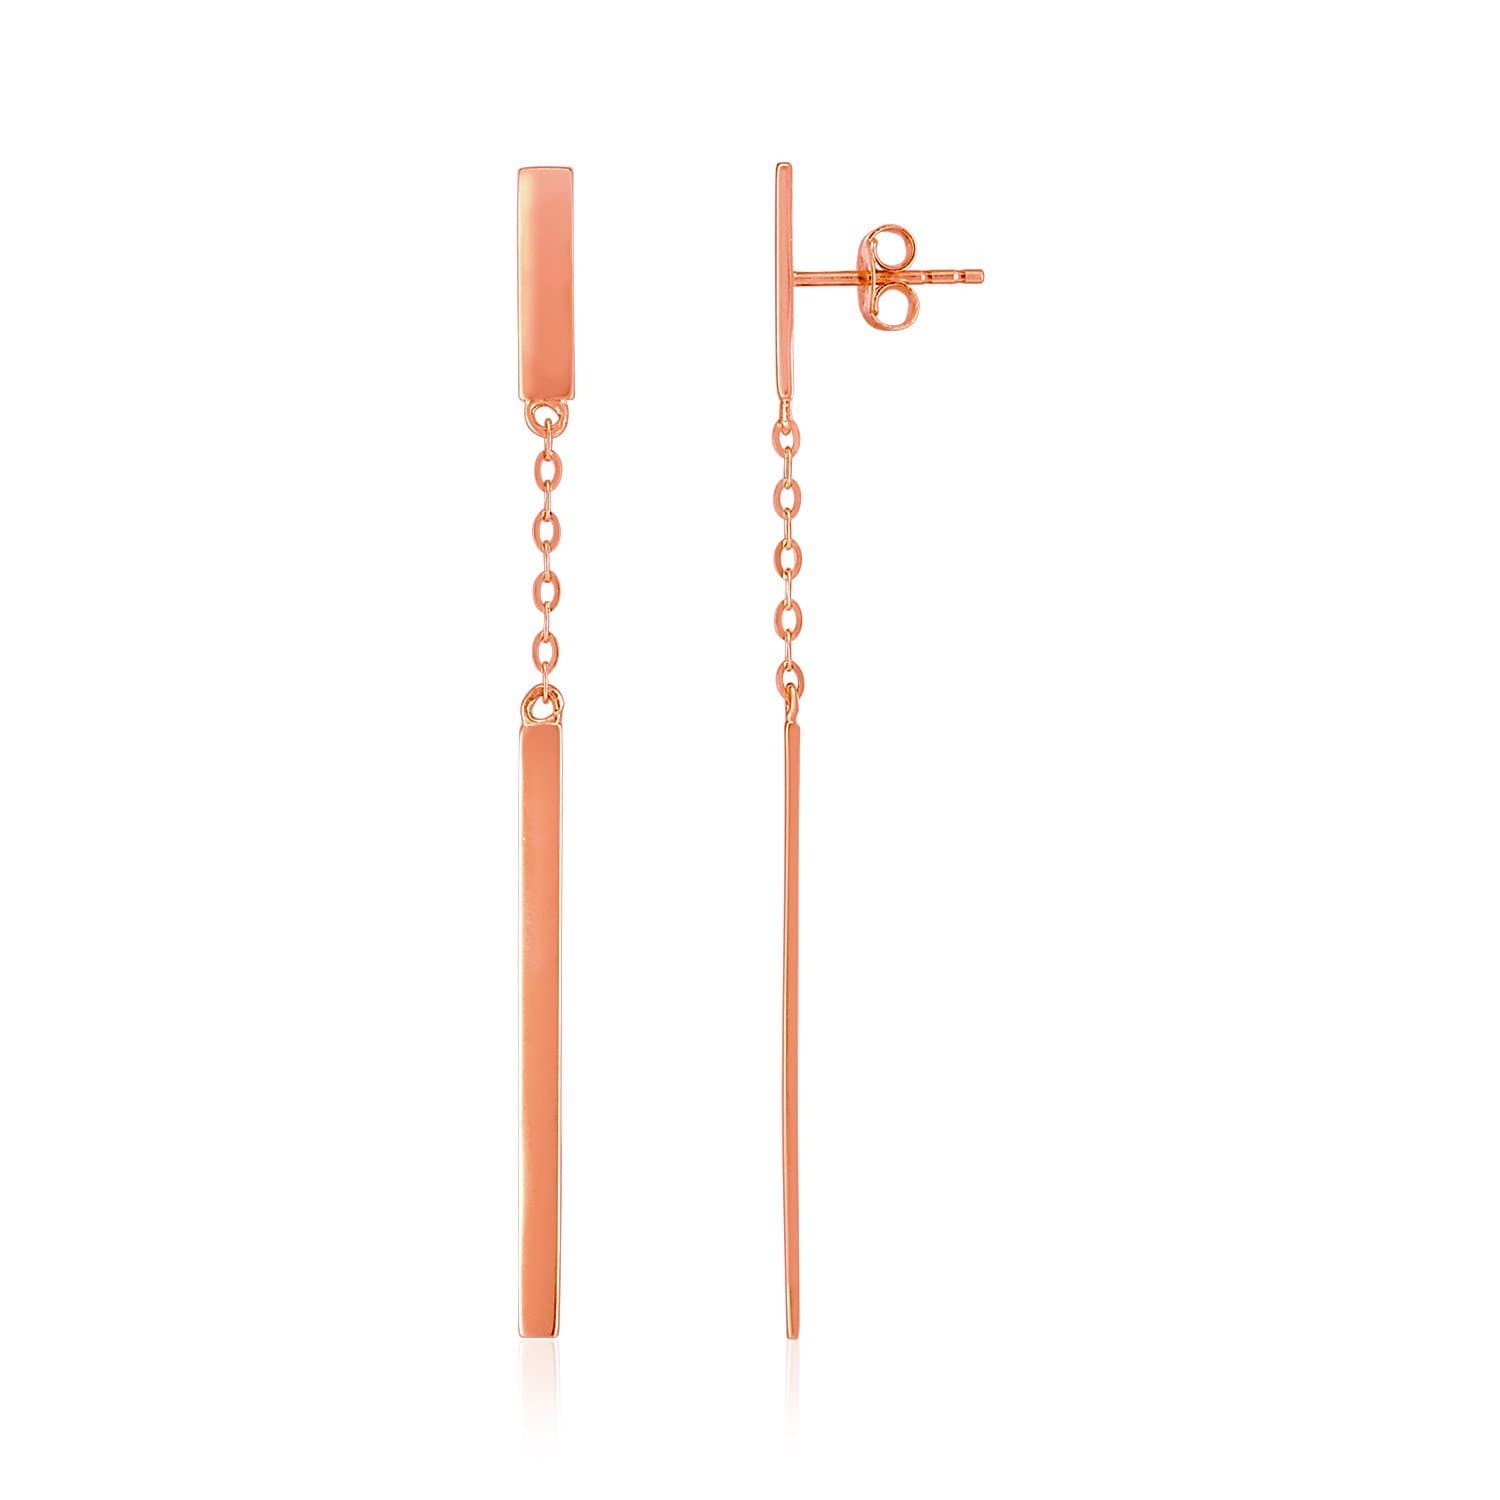 14k Rose Gold Polished Bar Earrings with Chain and Bar Drop